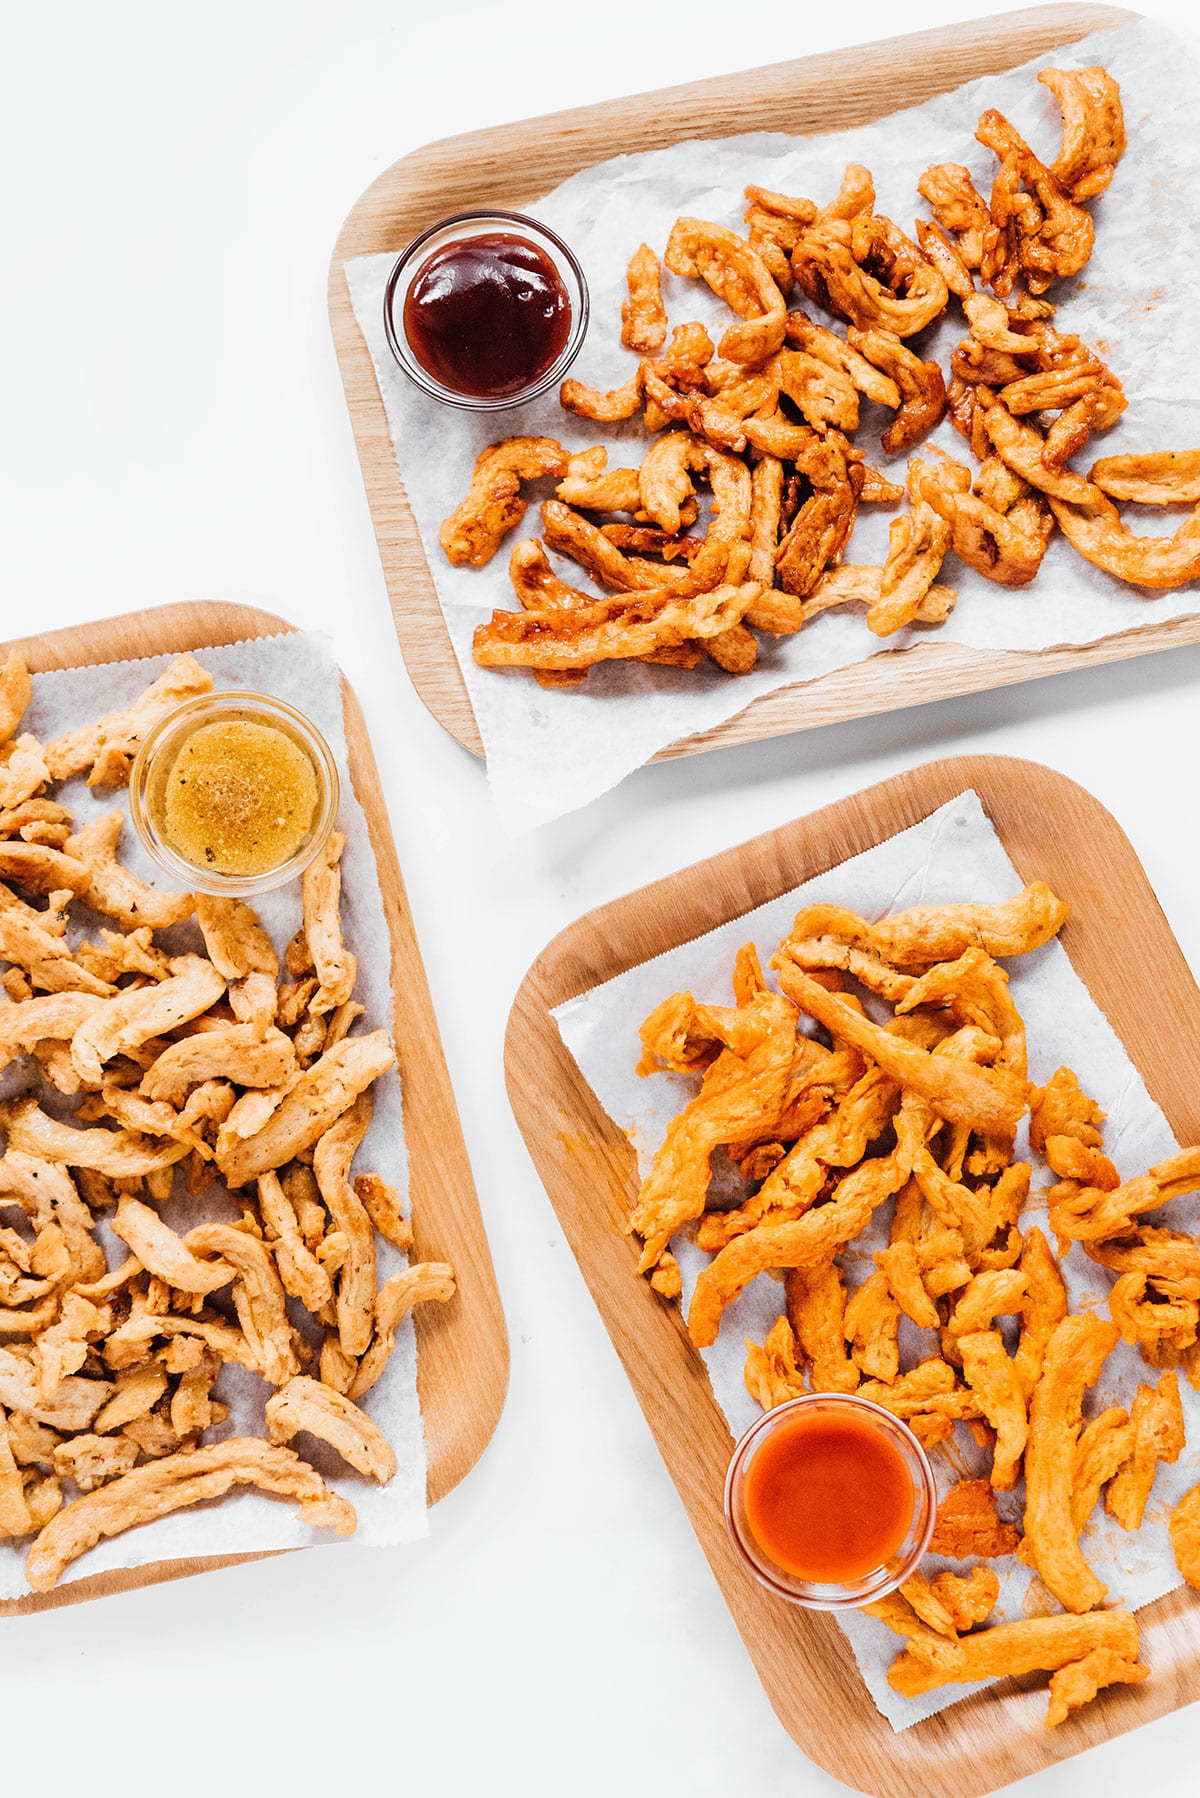 Three flavors of soy curls on rectangular plates.